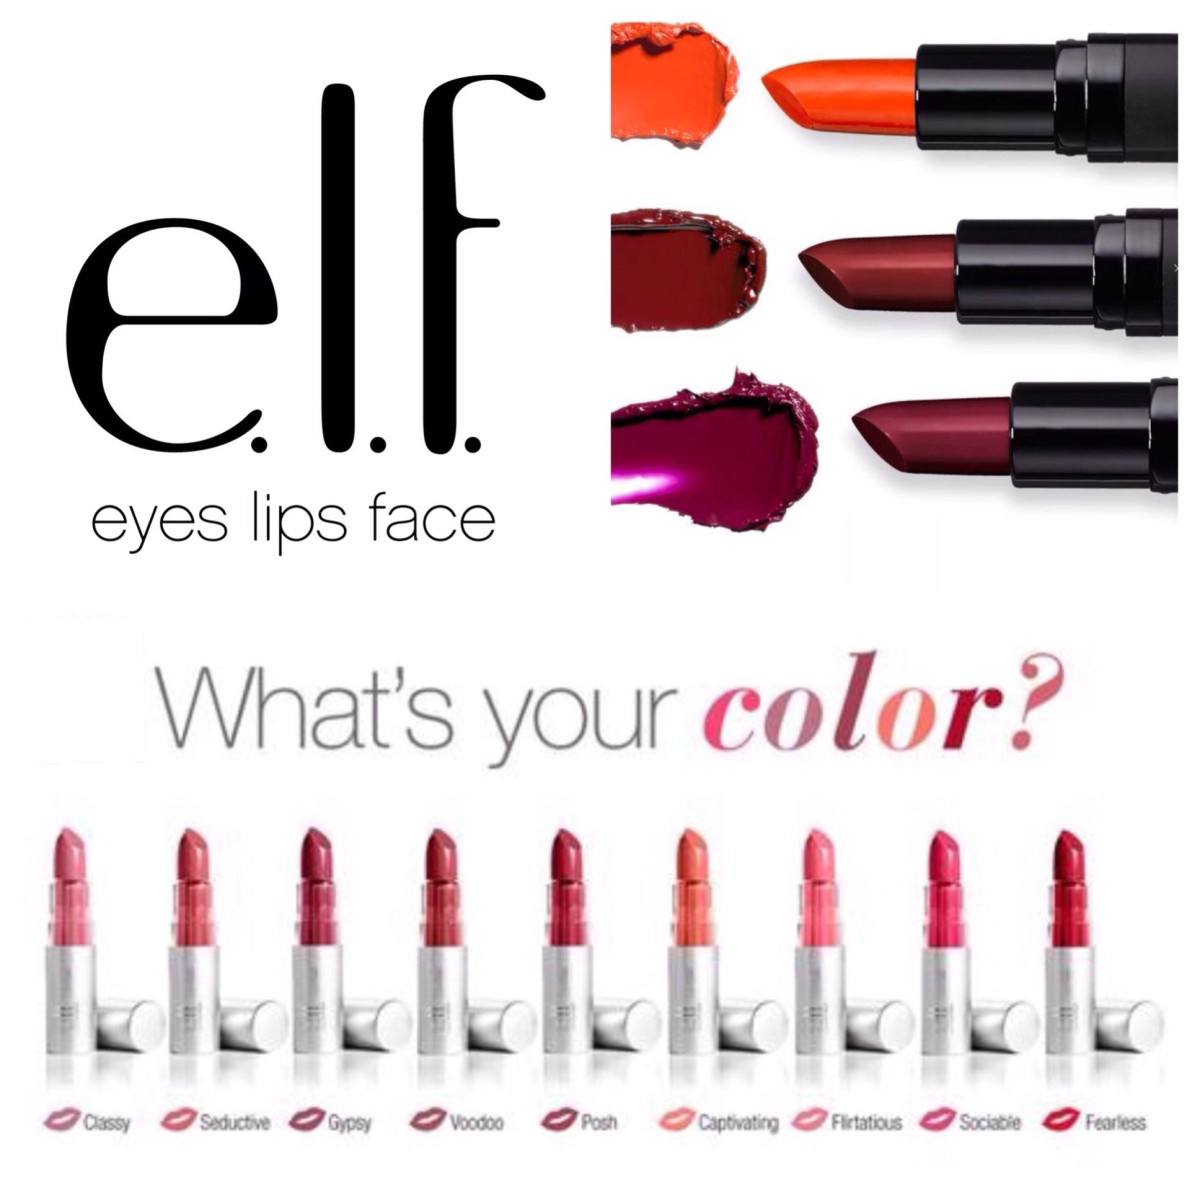 e.l.f. Cosmetics makes affordable cruelty-free beauty products.